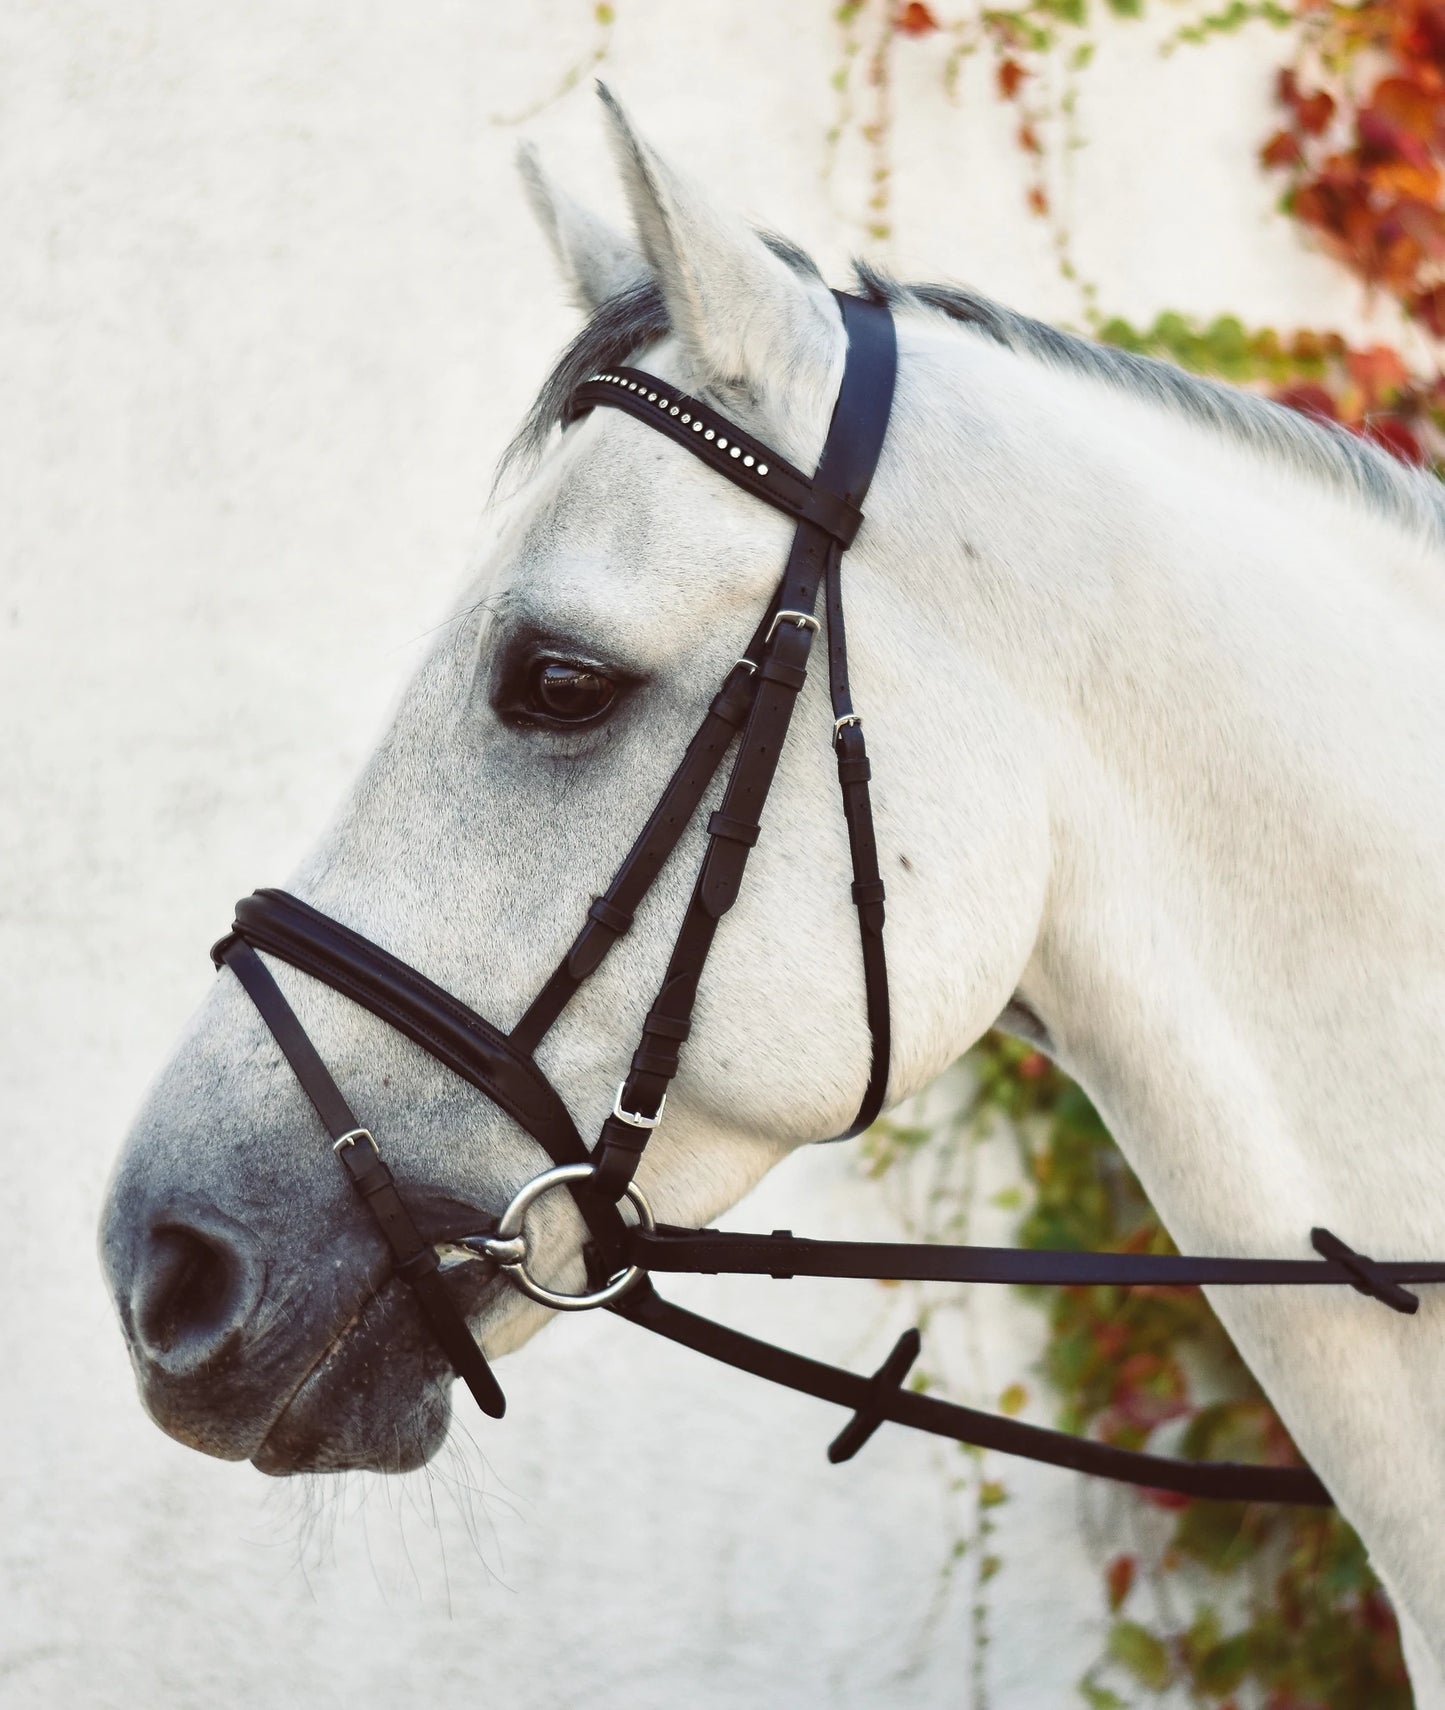 Mackey Equisential Bling Bridle with Reins